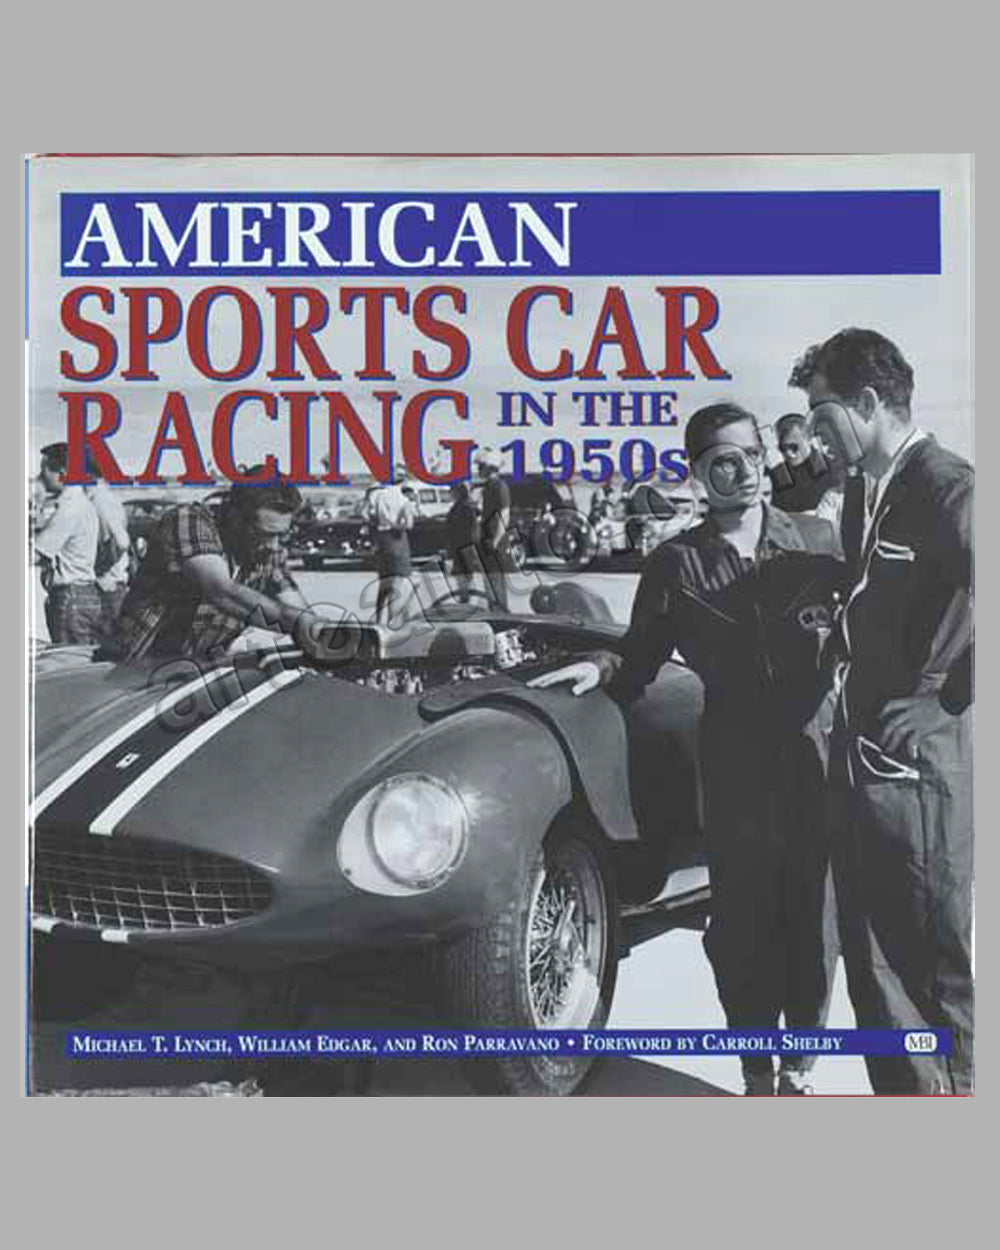 American Sports Car Racing in the 1950s book